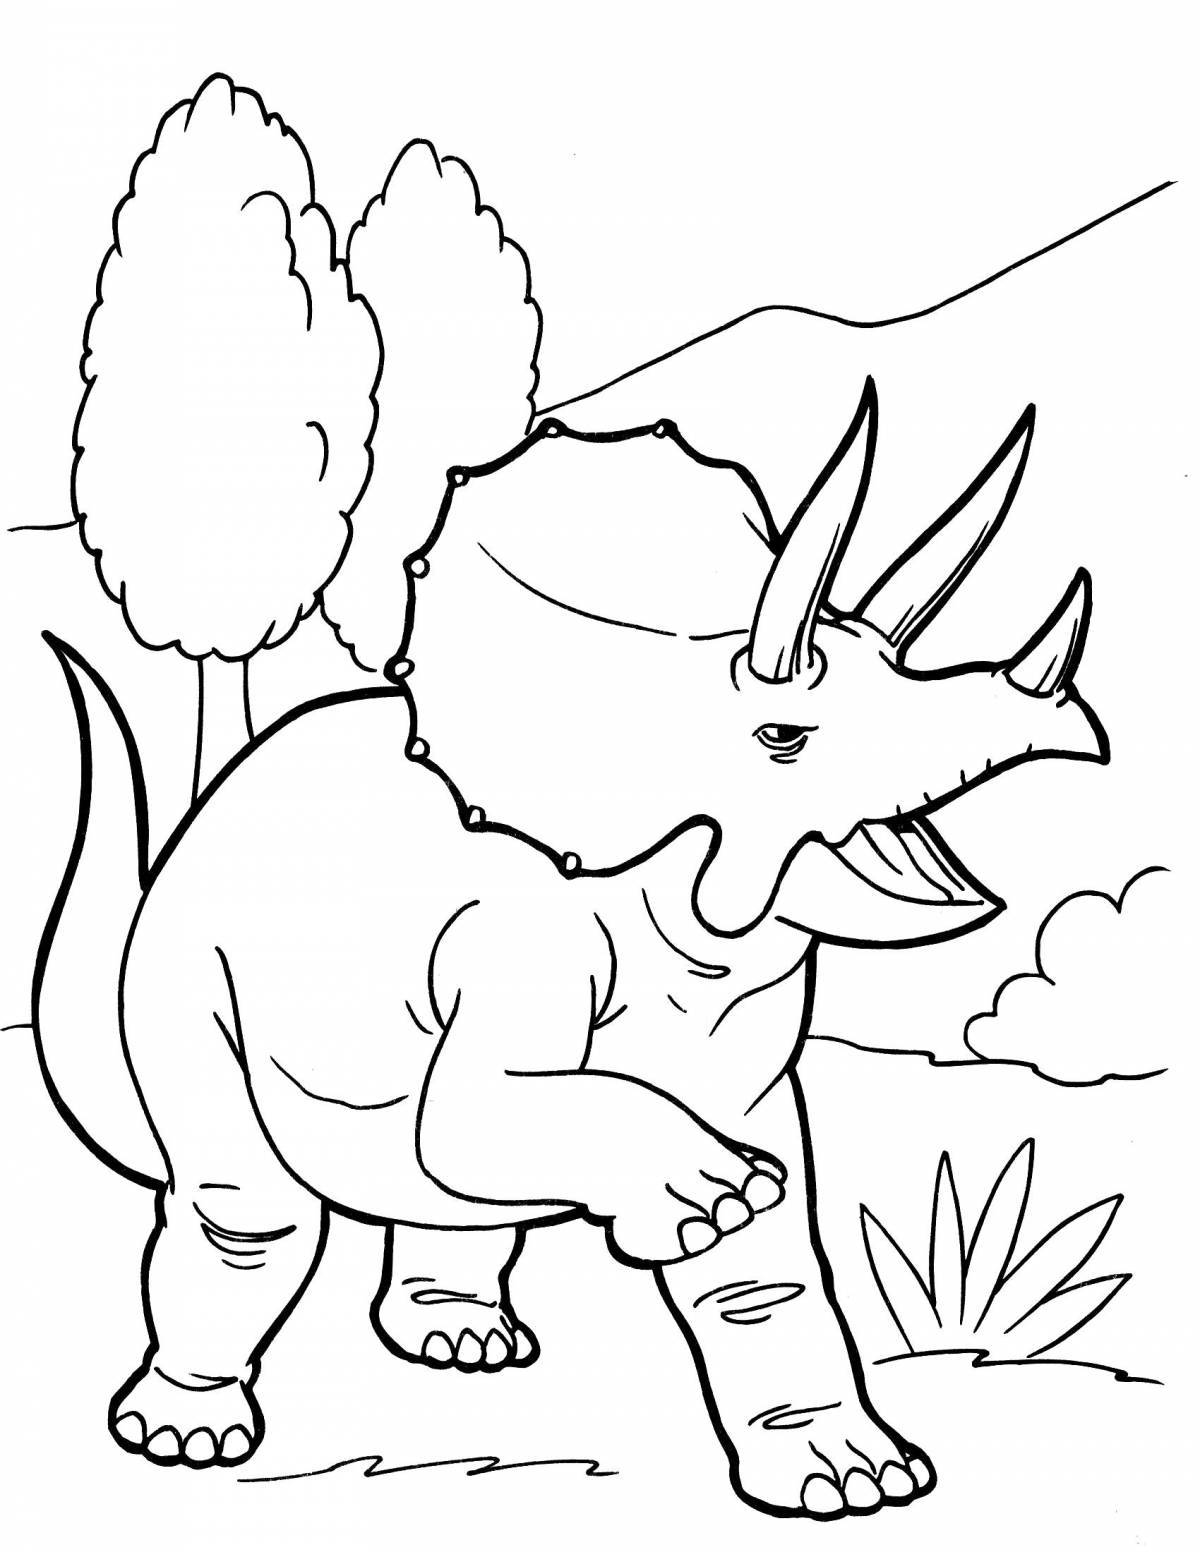 Dinosaur coloring book fun for 4-5 year olds